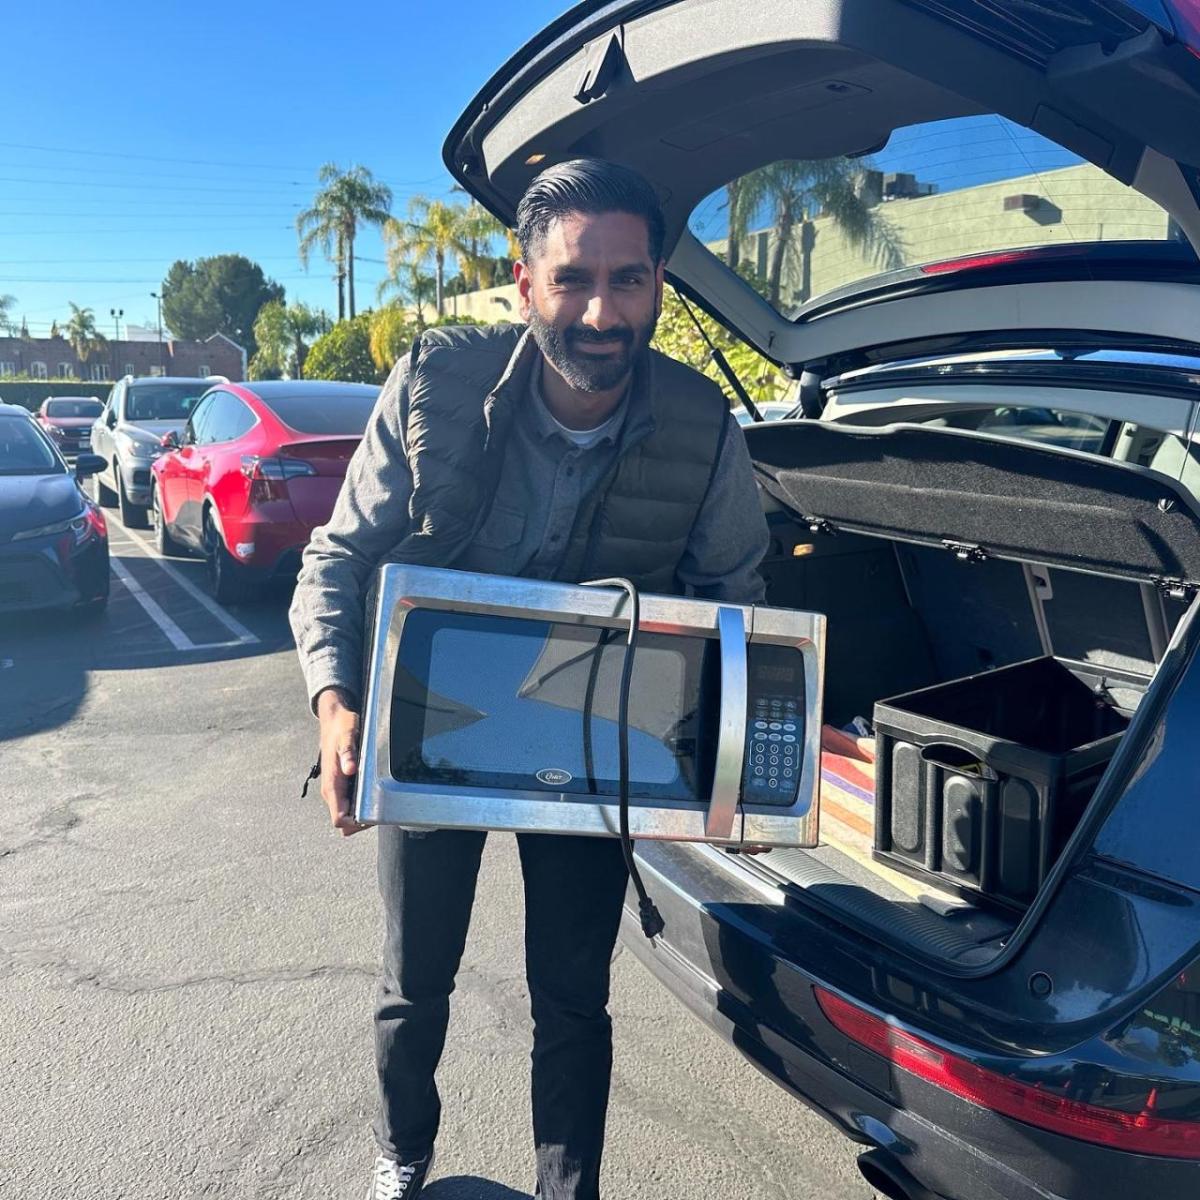 Man holding microwave in parking lot